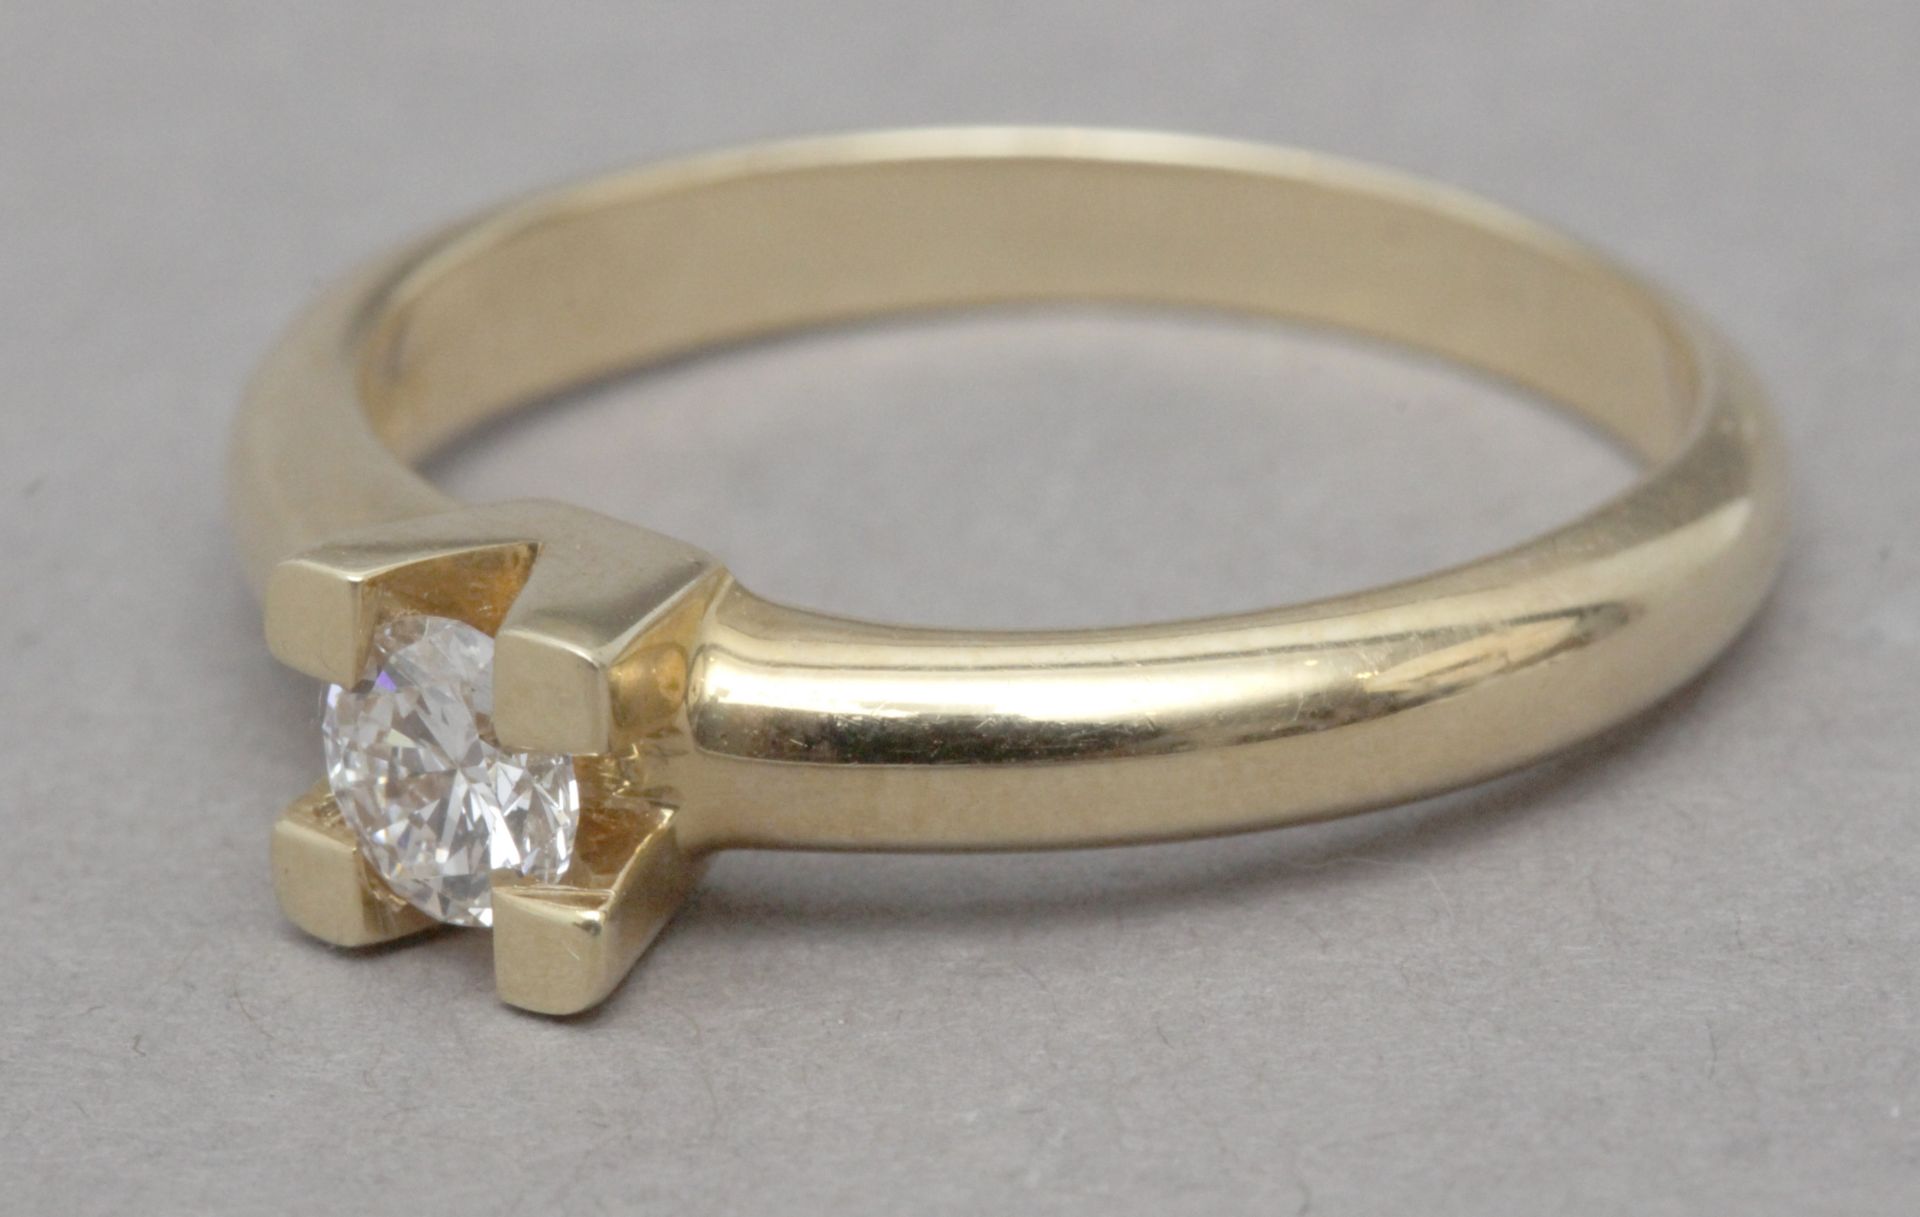 A 0,35 ct. brilliant cut diamond solitaire ring - Image 2 of 4